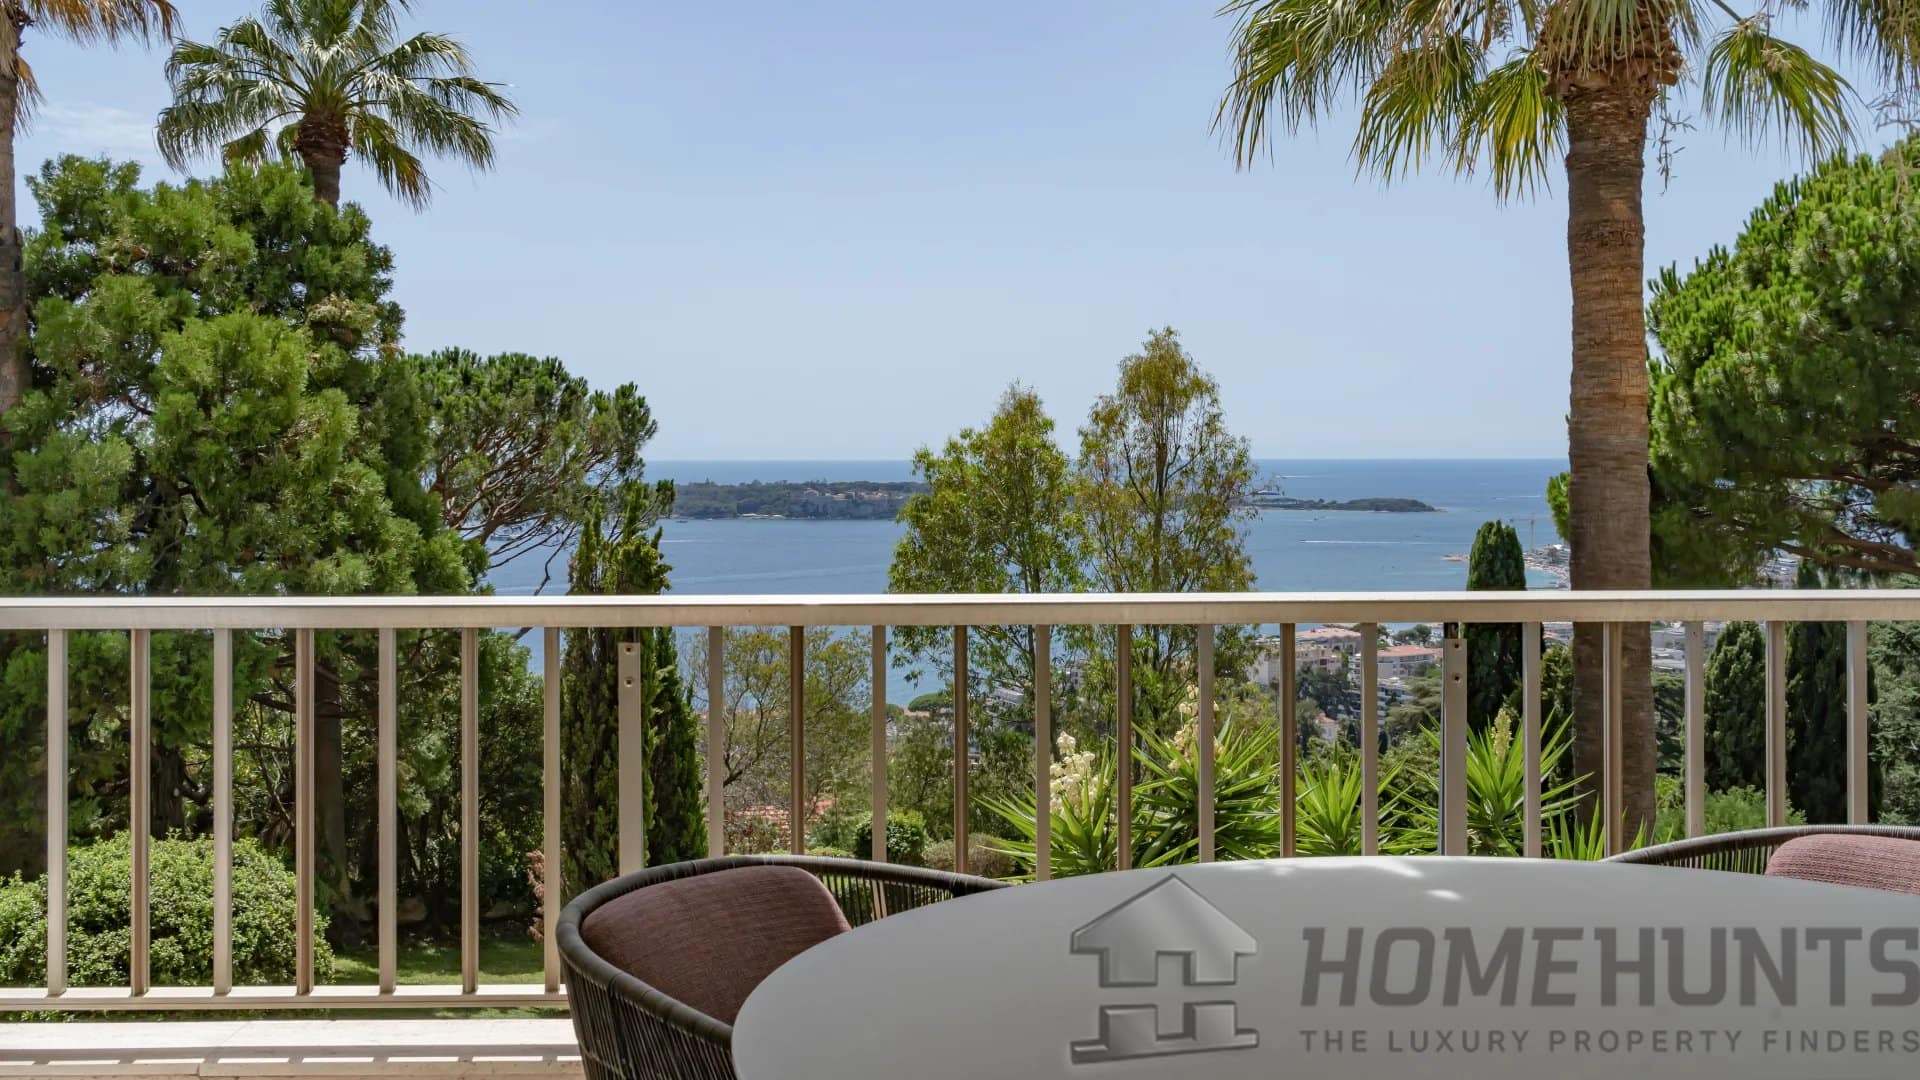 3 Bedroom Apartment in Cannes 11